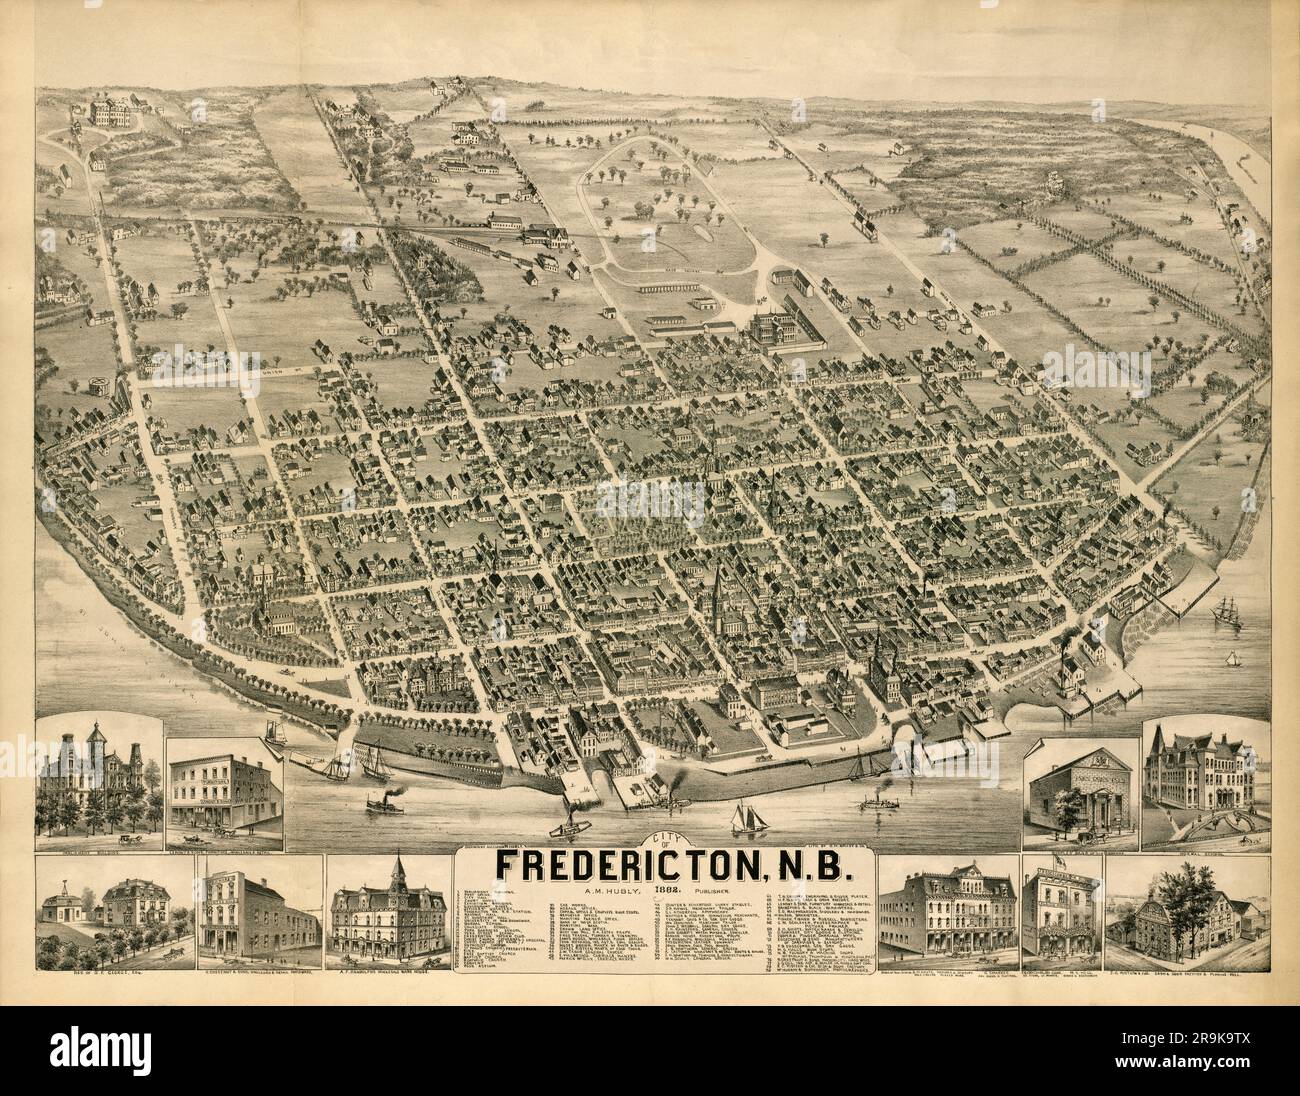 Bird's-eye panoramic map view of the city of Fredericton, New Brunswick, Canada ca. 1882. Insets show buildings and sites points of interest. Stock Photo